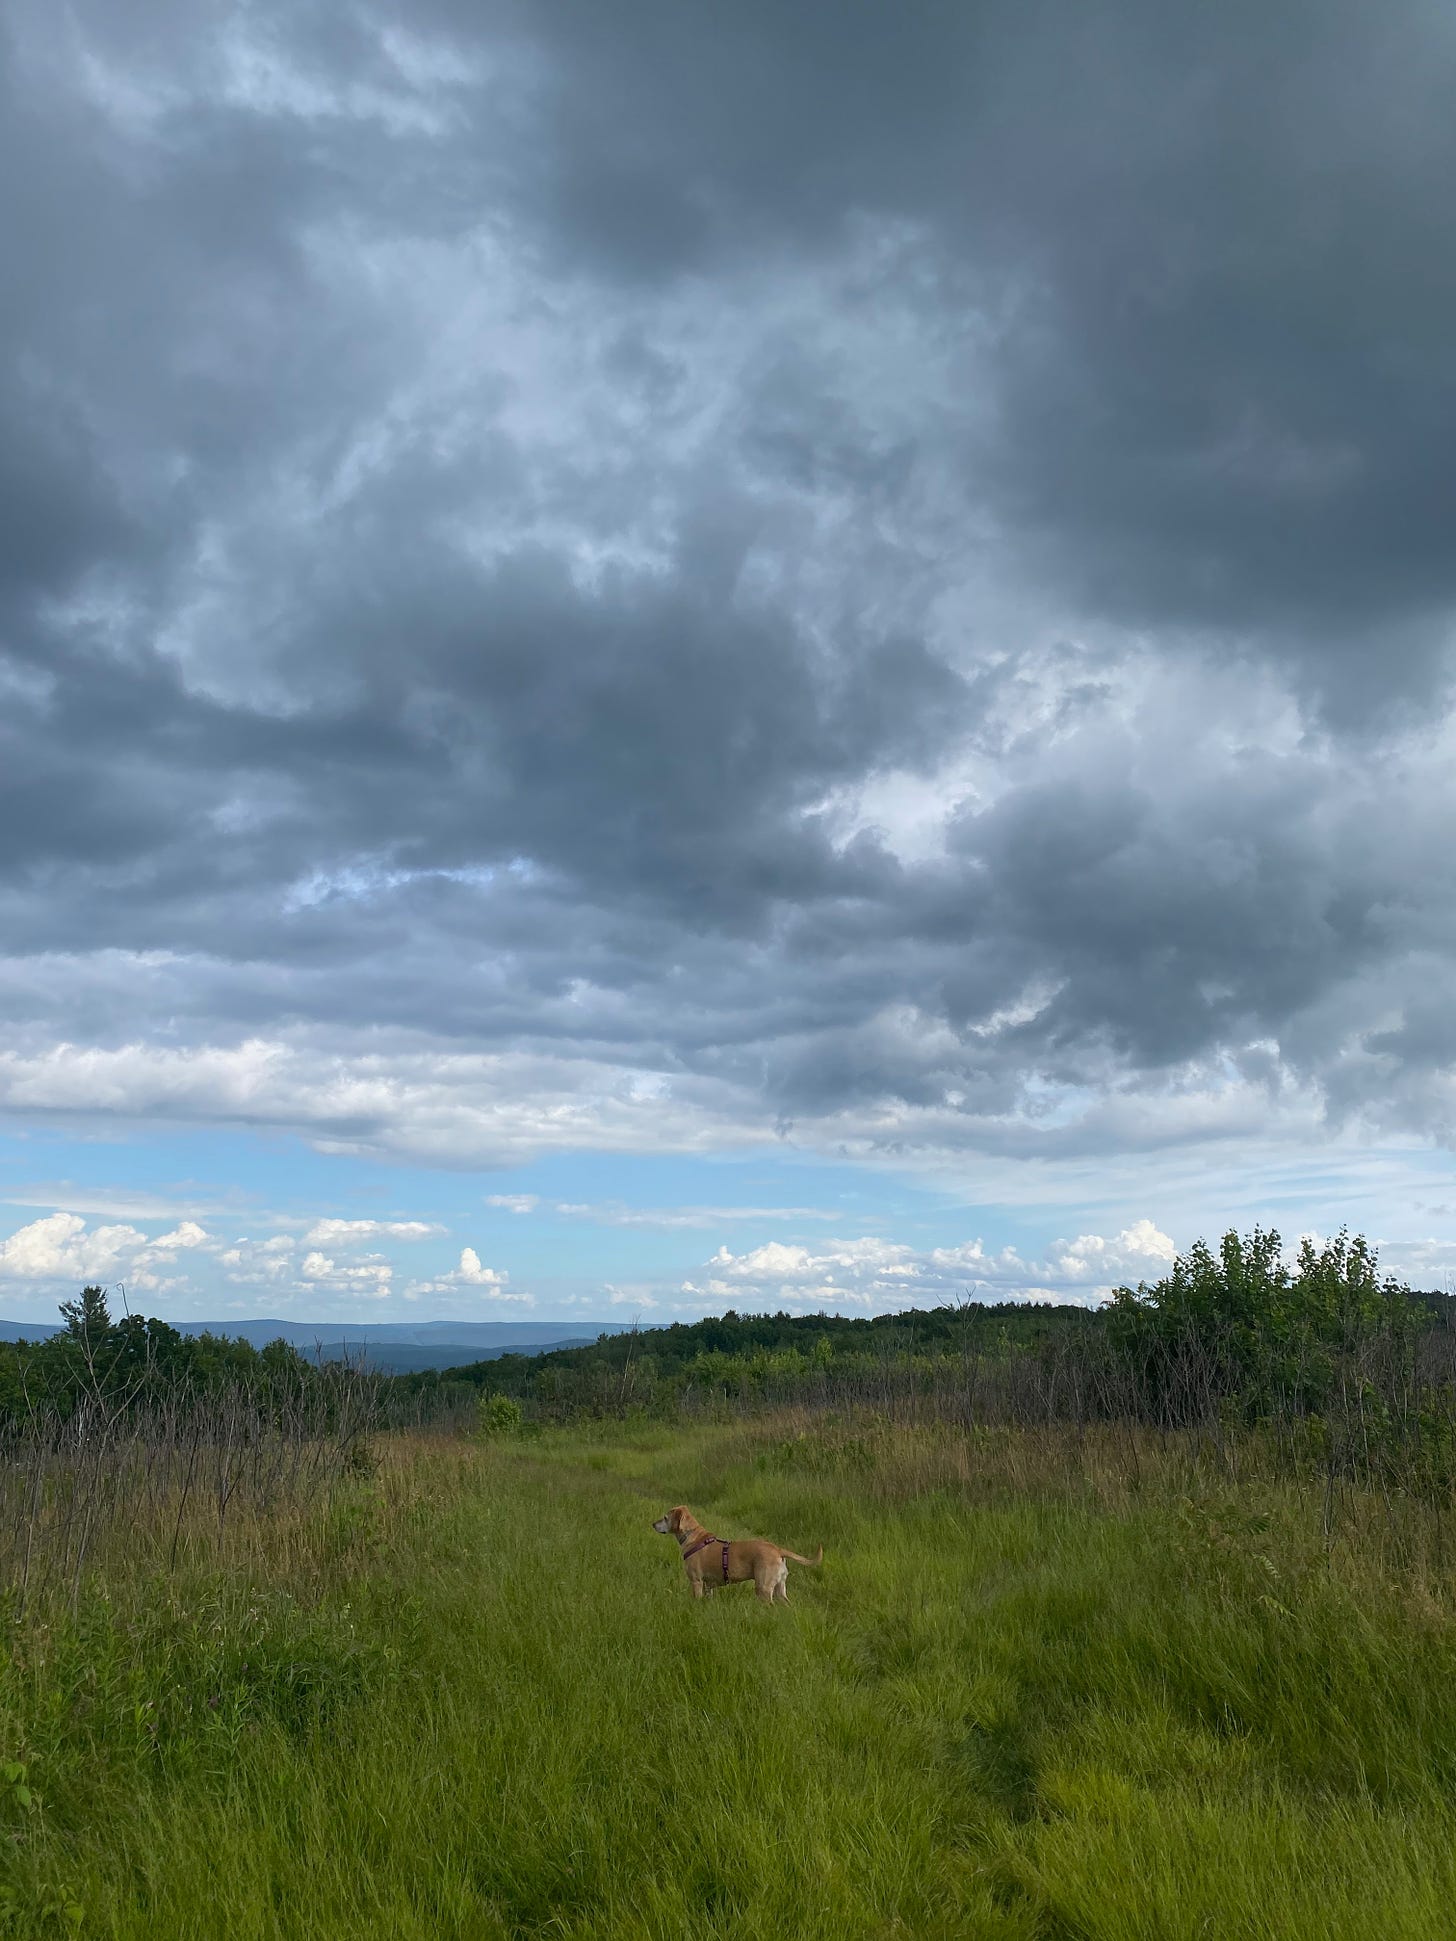 My brown dug stands on a grassy hilltop beneath a sky of dark clouds. She is very small; the sky takes up most of the photo.